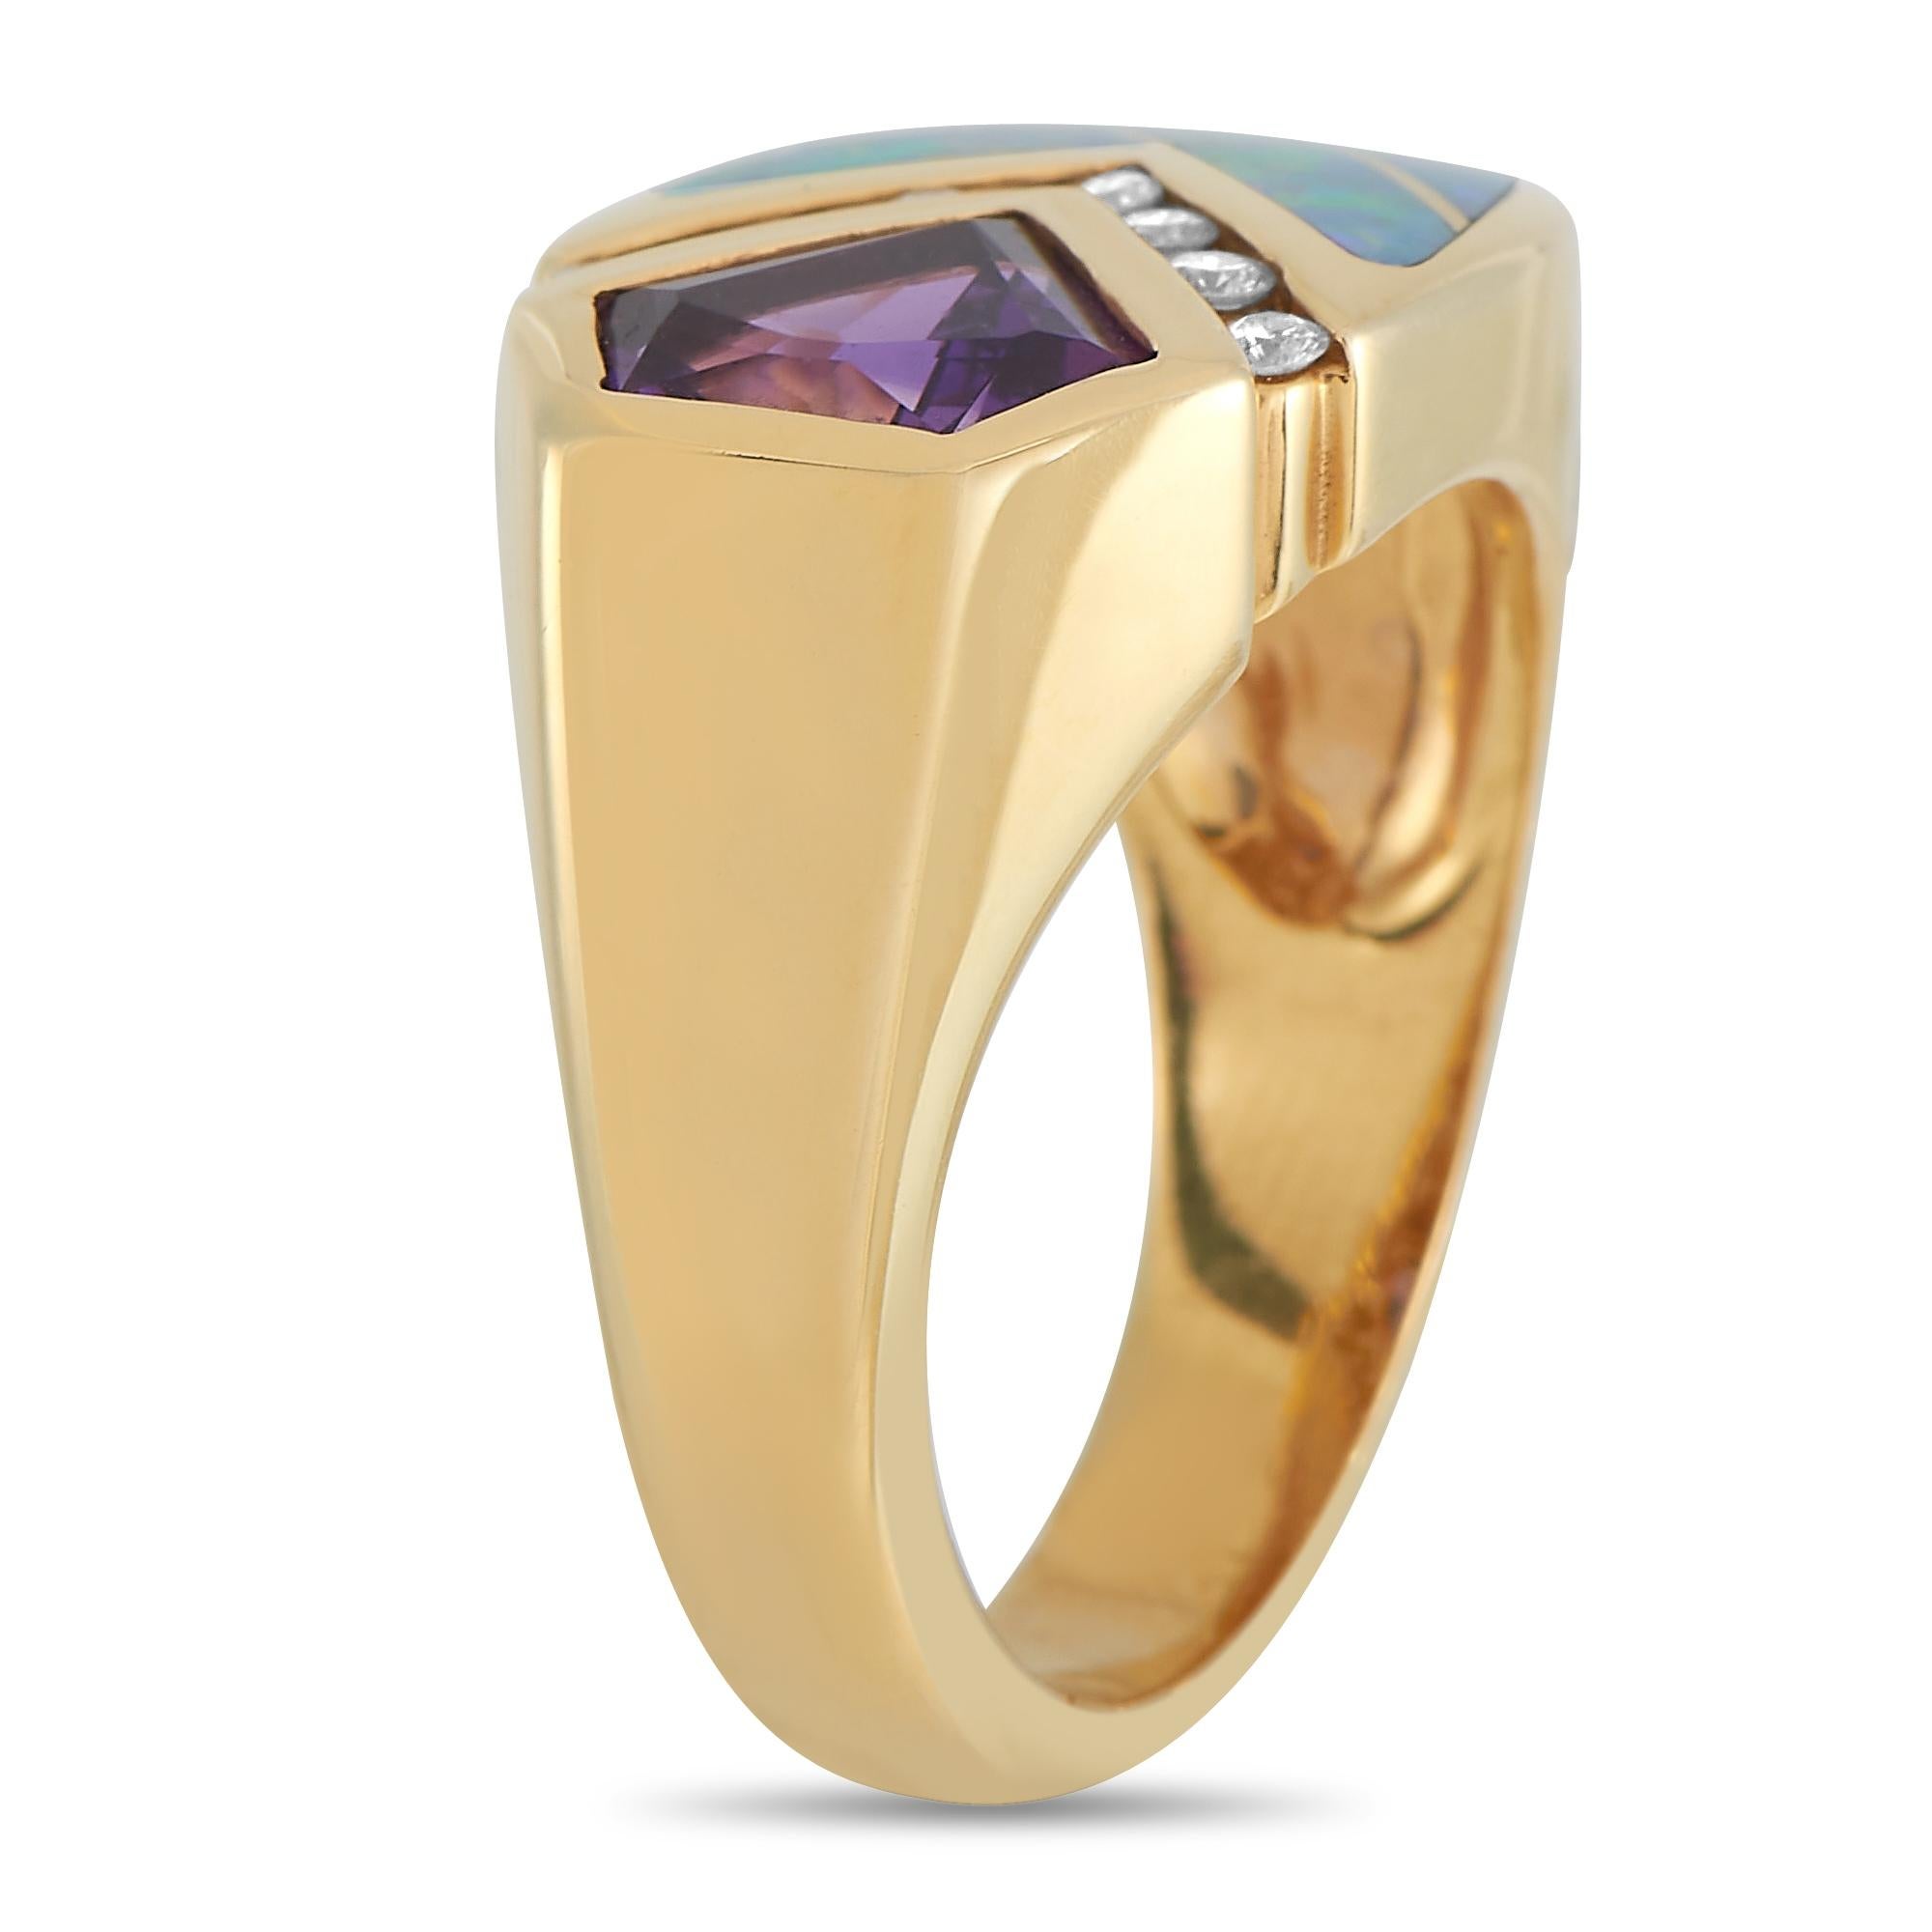 A stylish combination of colors and textures make this Kabana ring truly extraordinary. This dynamic design comes to life thanks to a 1.80 carat amethyst gemstone, fiery inlaid opals, and a series of diamonds with a total weight of 0.17 carats. It